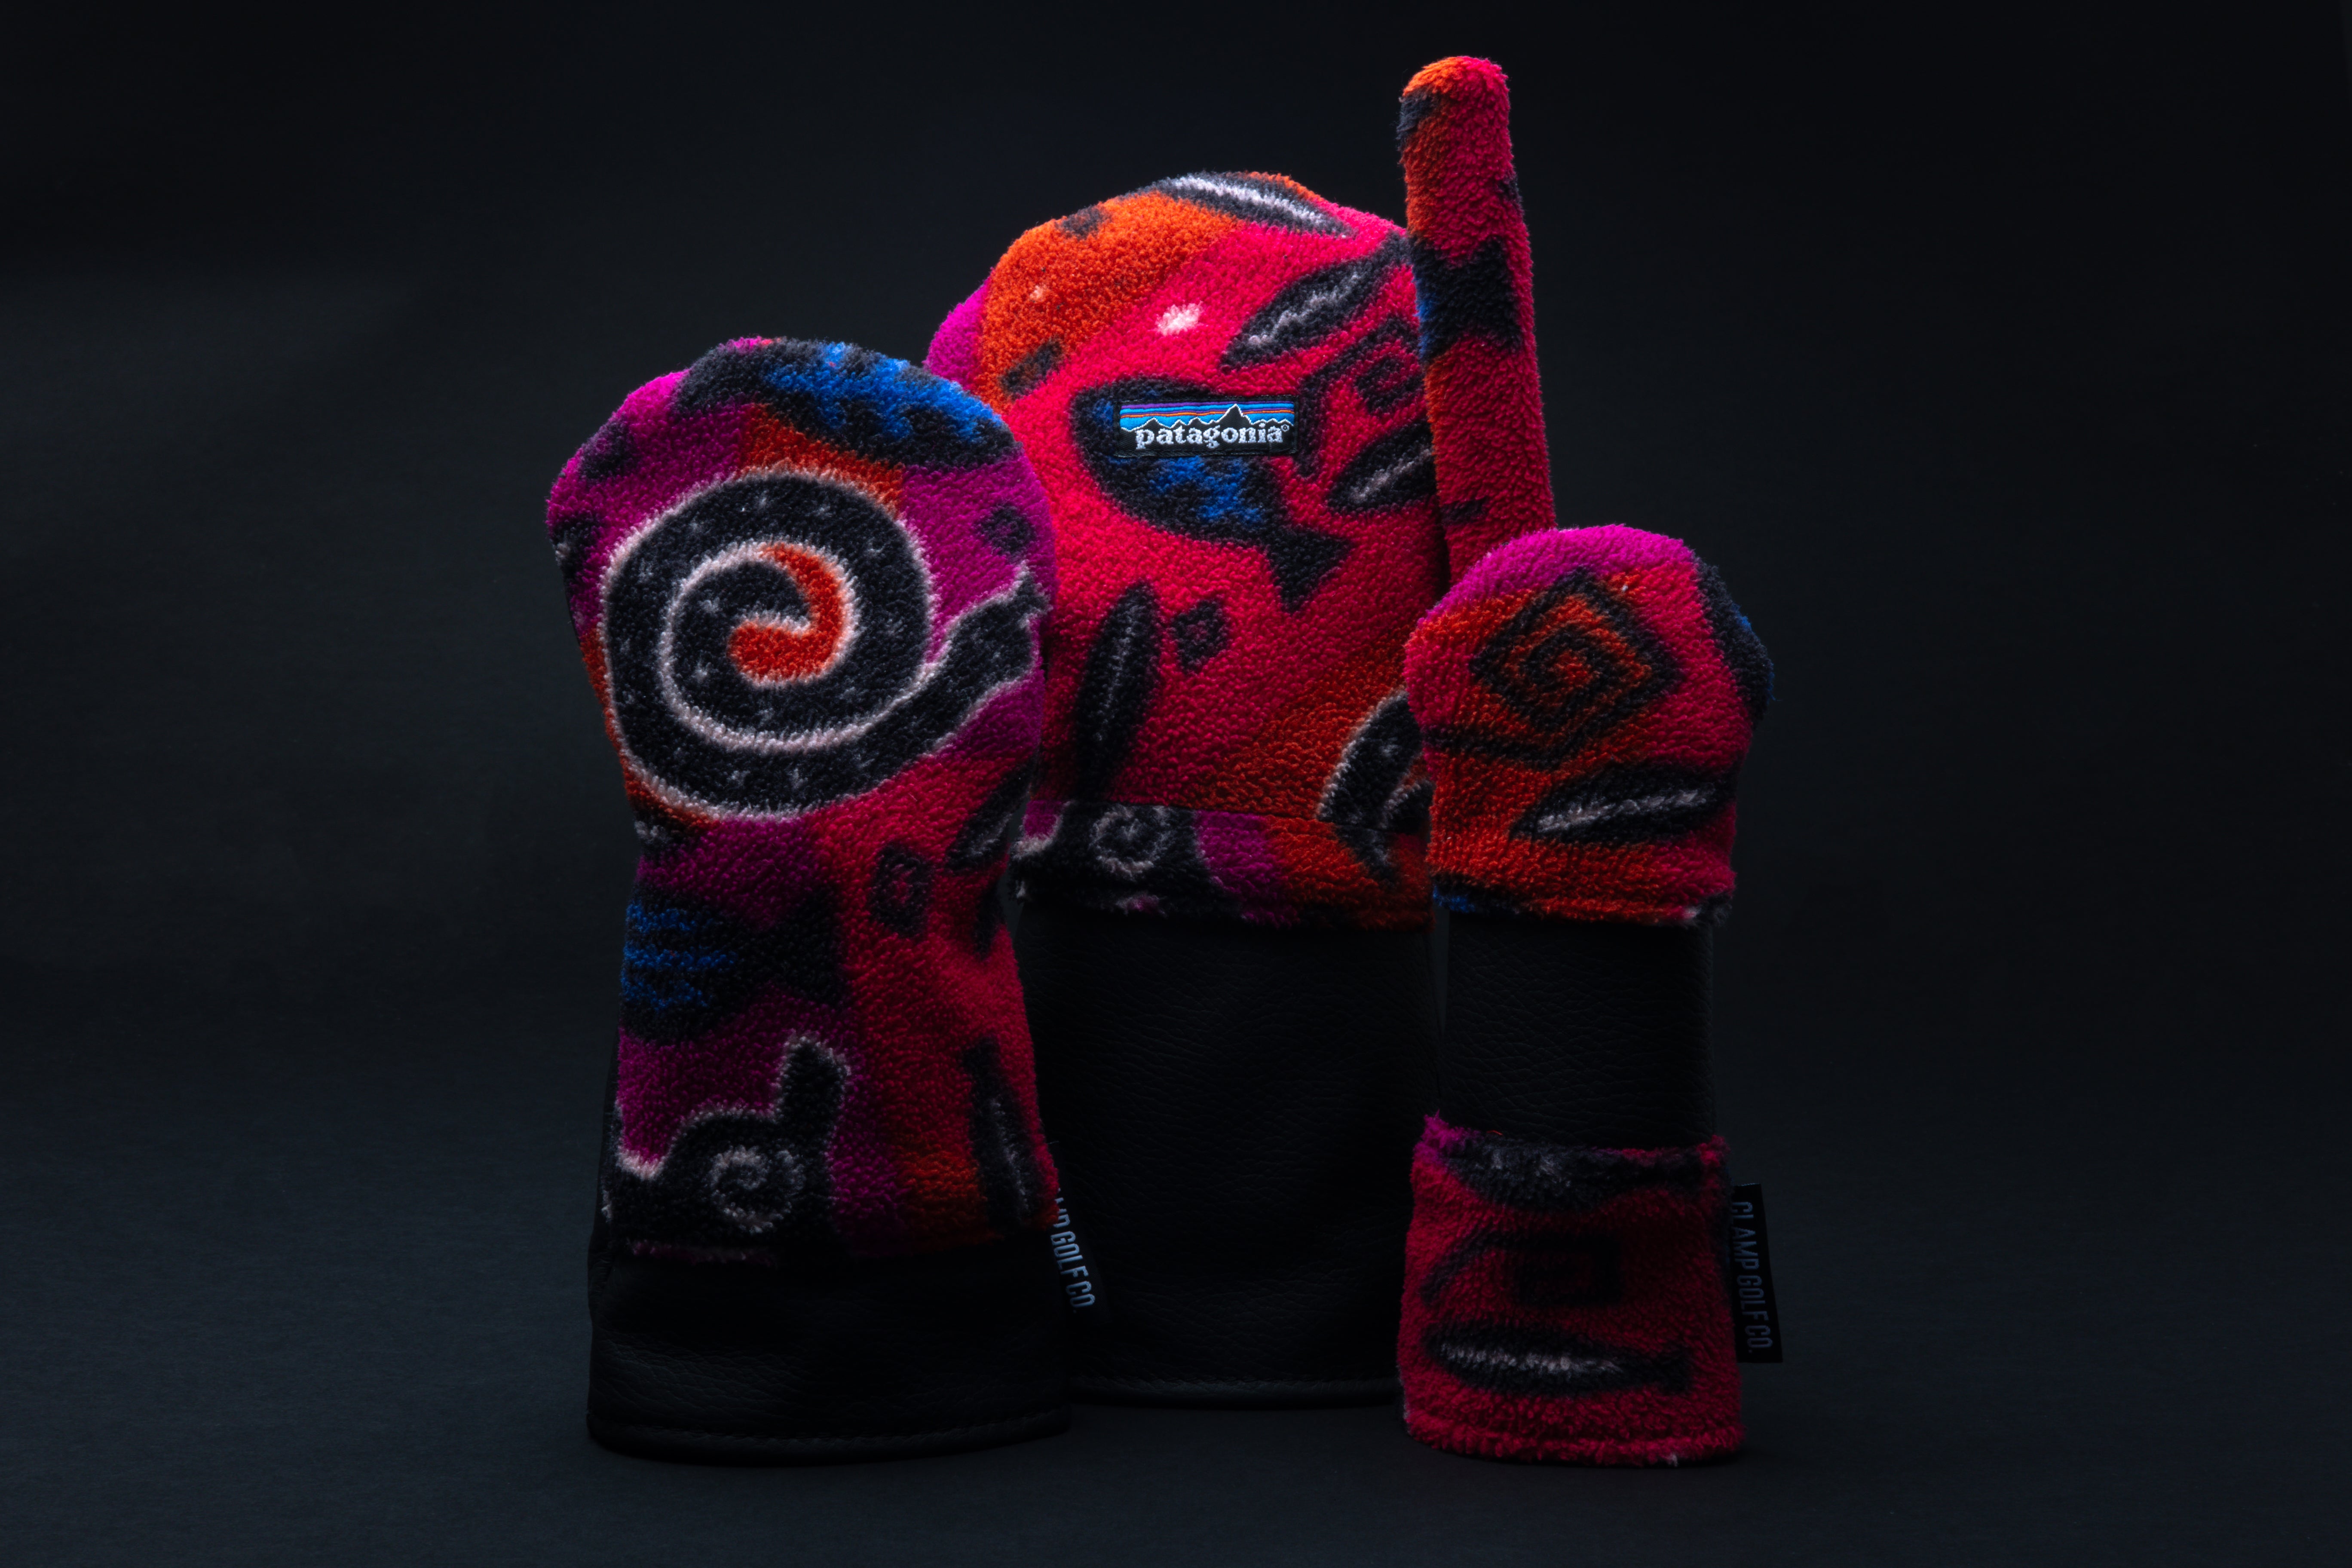 Reworked Patagonia Headcovers